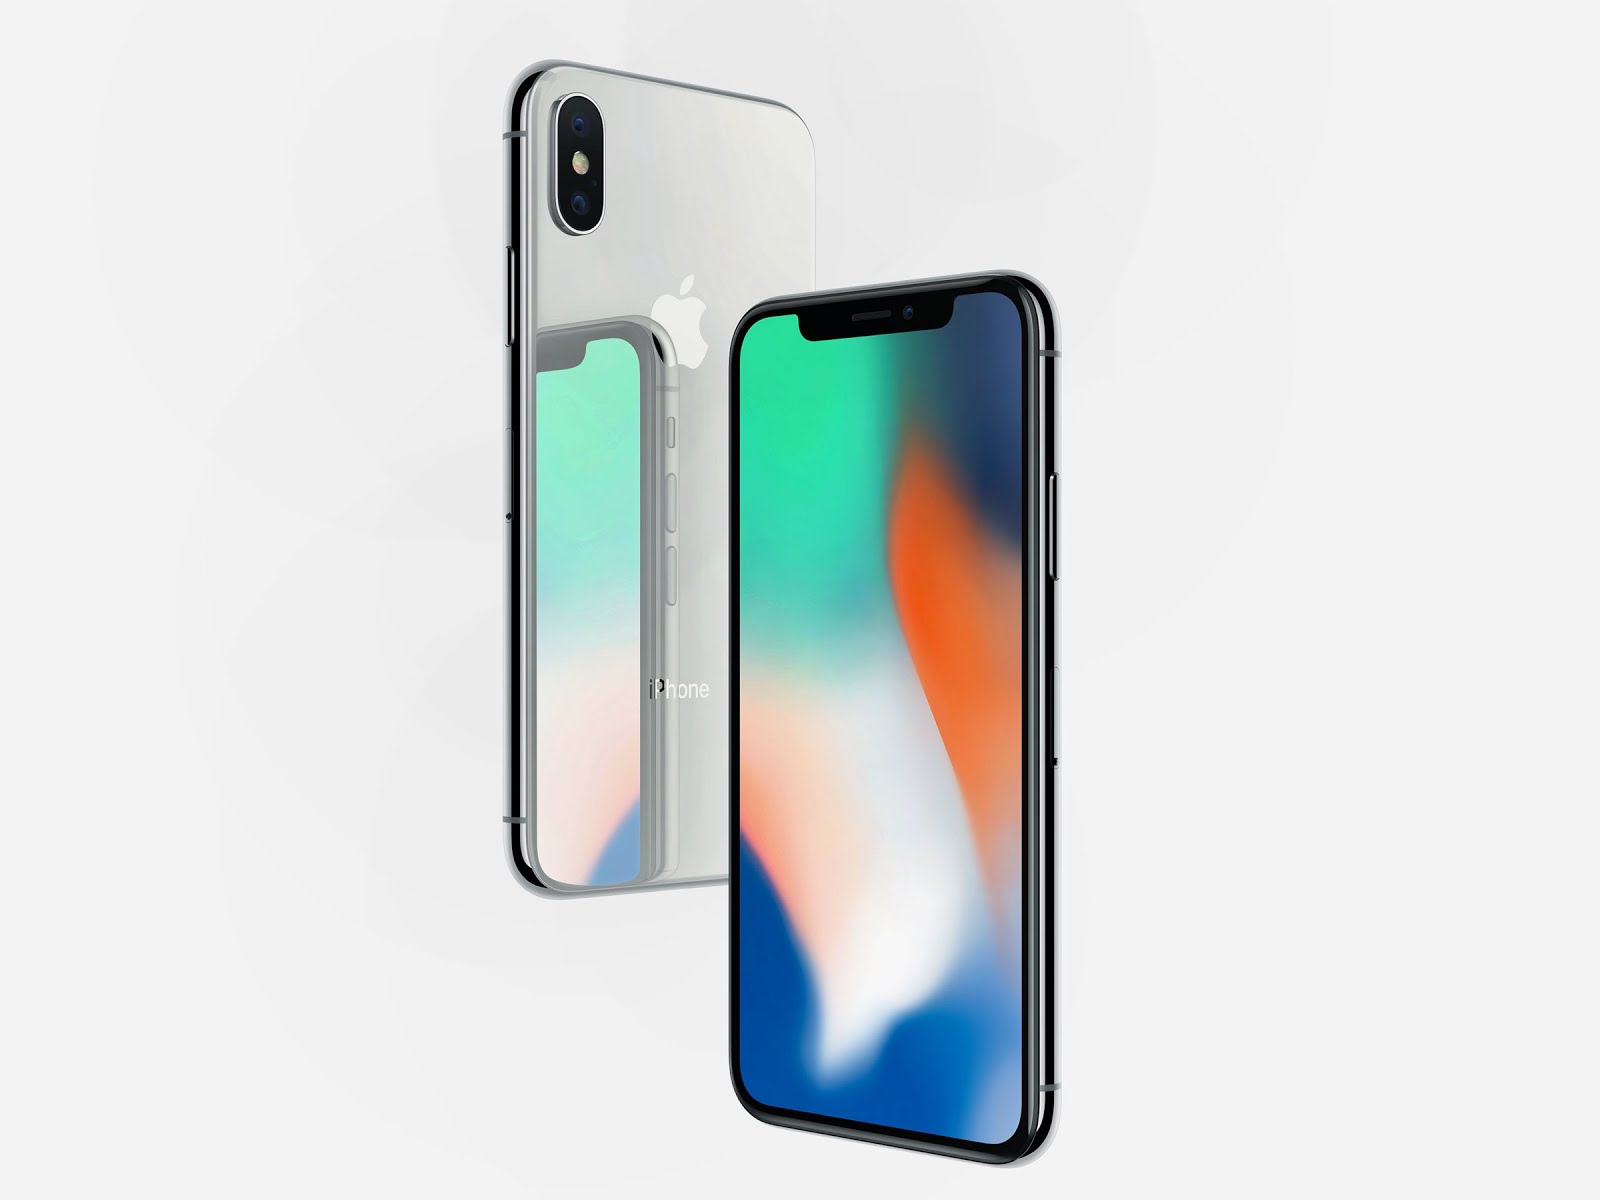 iPhone reviewer Steven Levy gets early hands-on with iPhone X